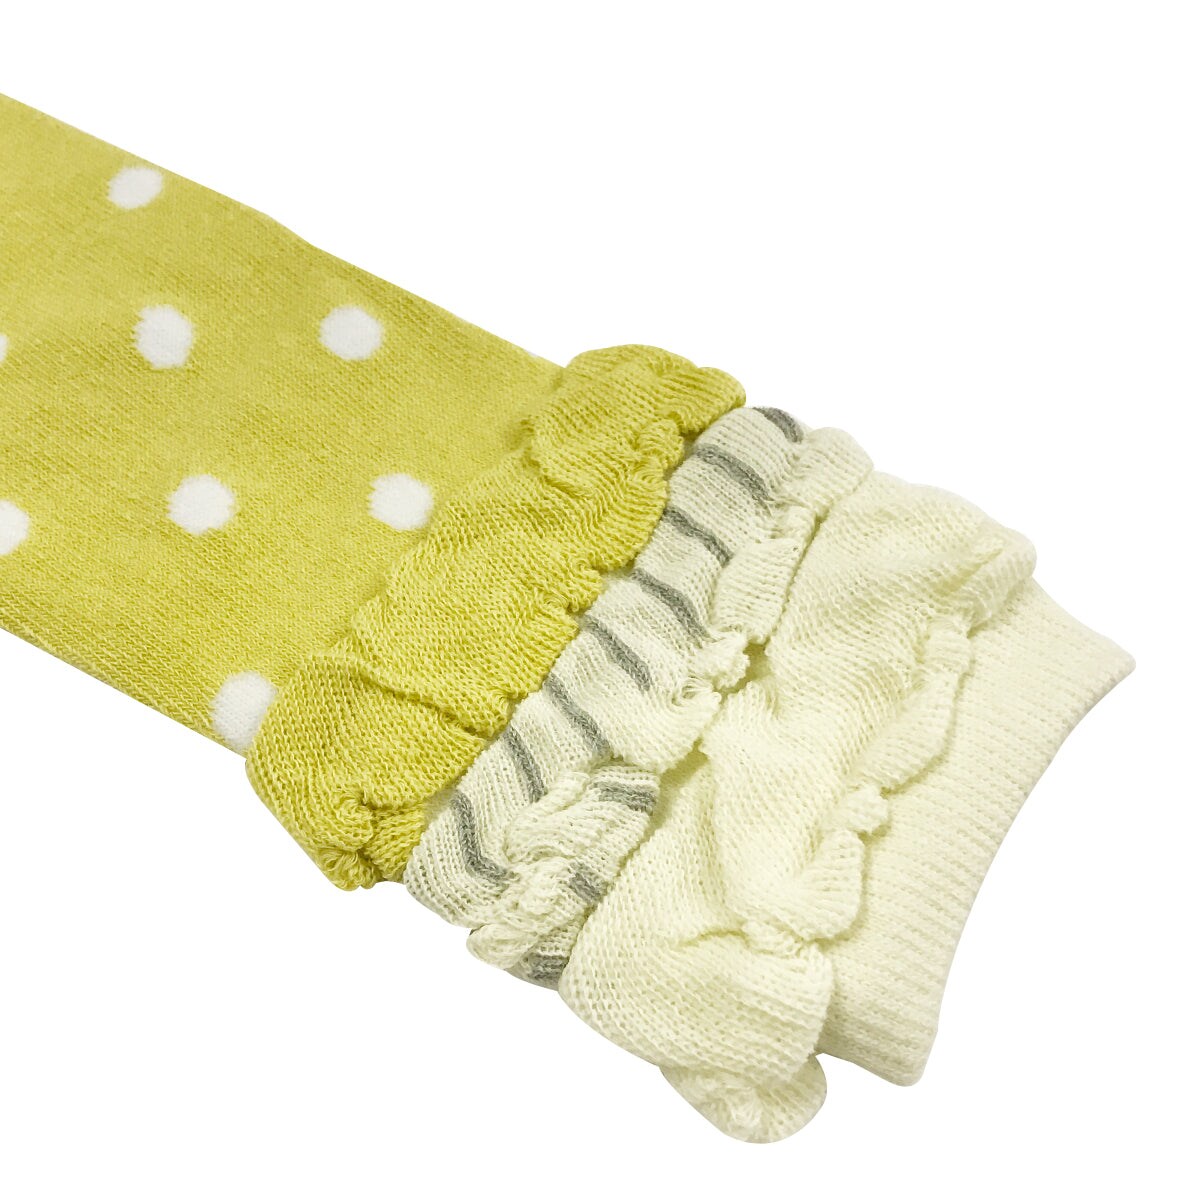 Wrapables Colorful Baby Leg Warmers Set of 3, Stylish Bears and Dots